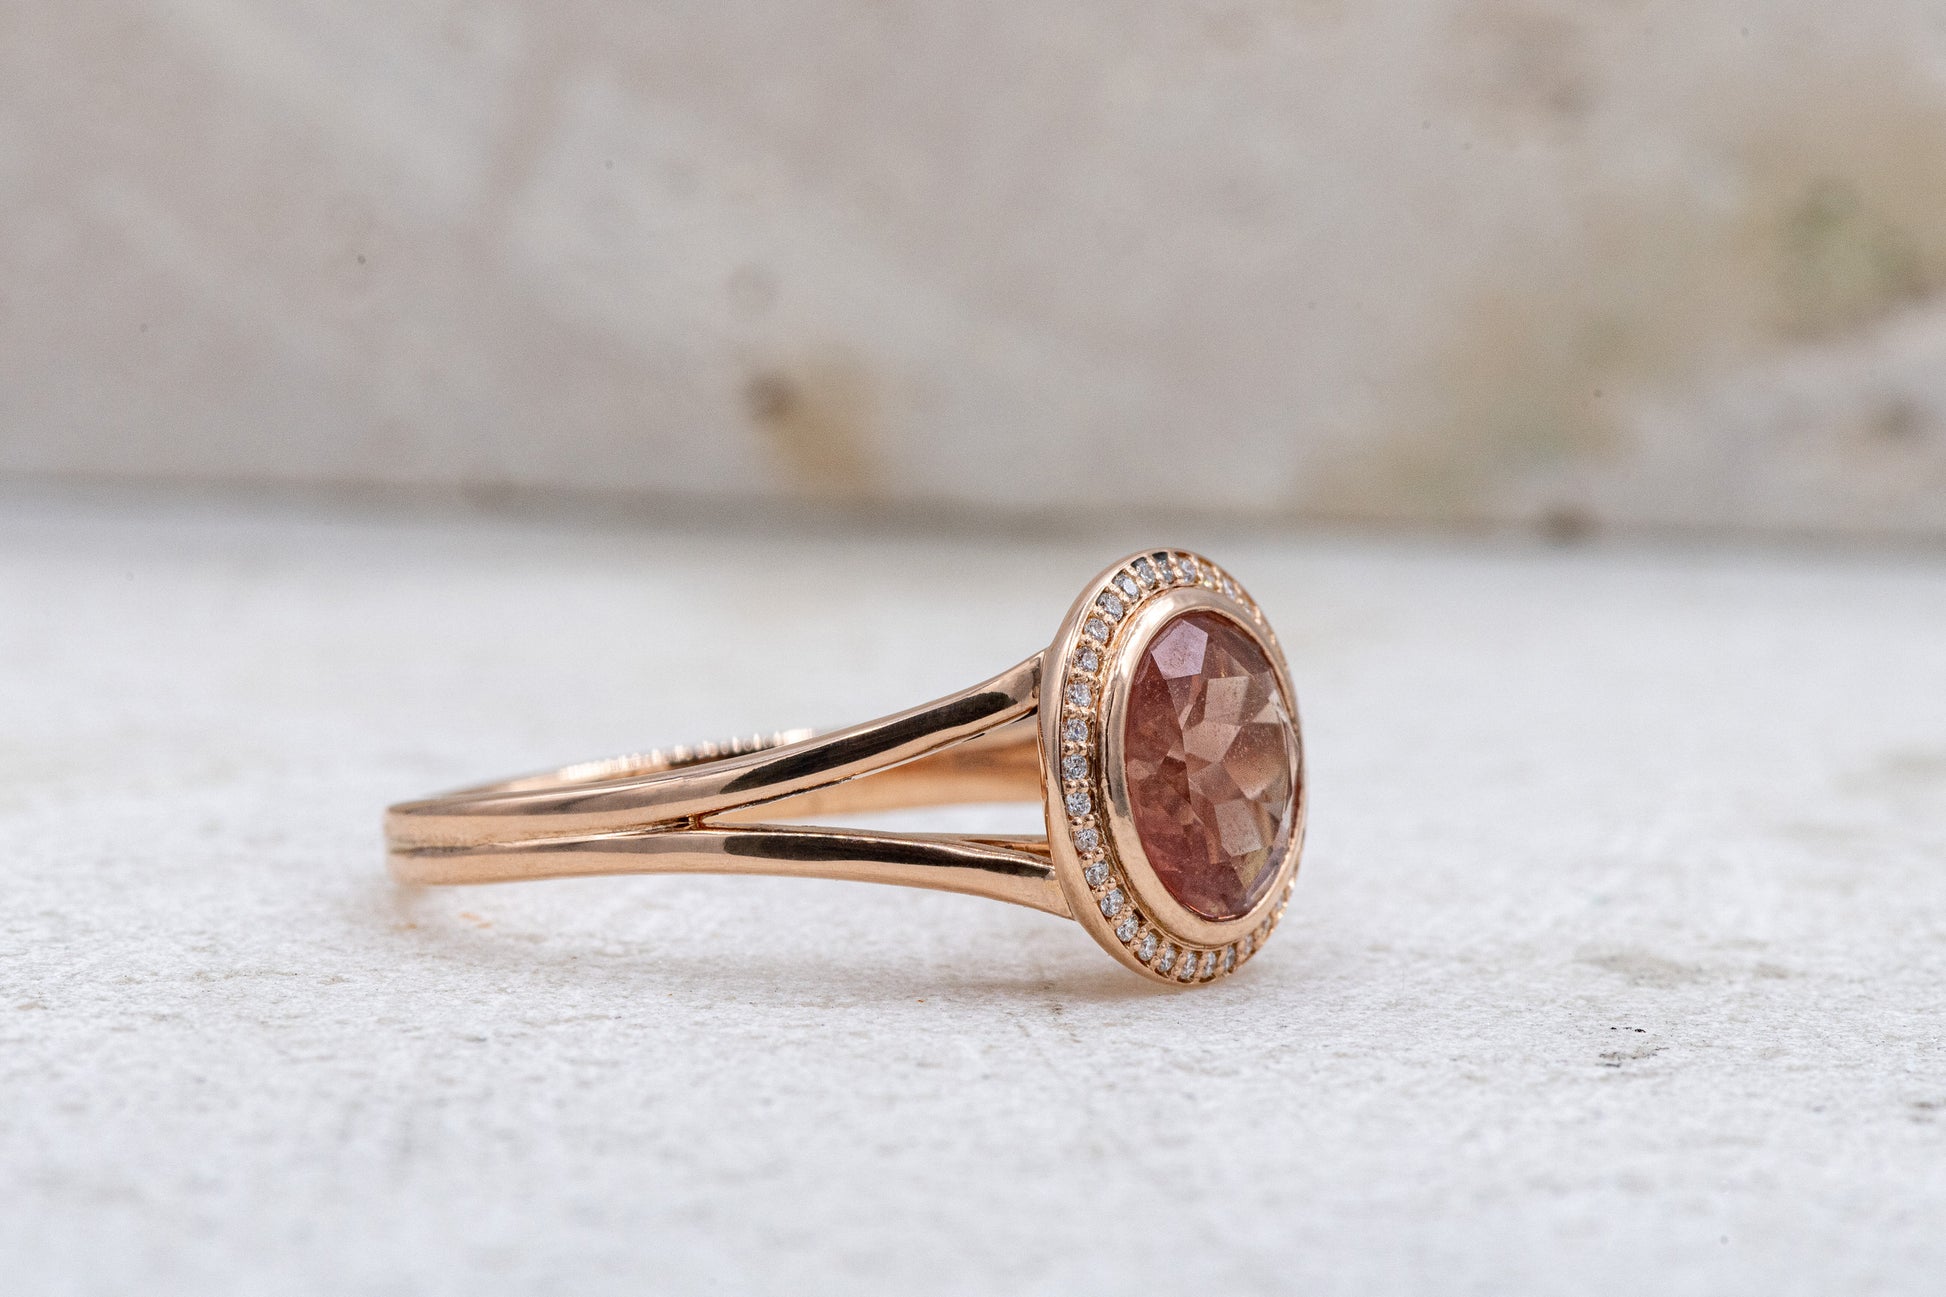 Cassin Jewelry presents a handmade Oregon Sunstone Diamond Halo Ring with a brown stone and diamonds.